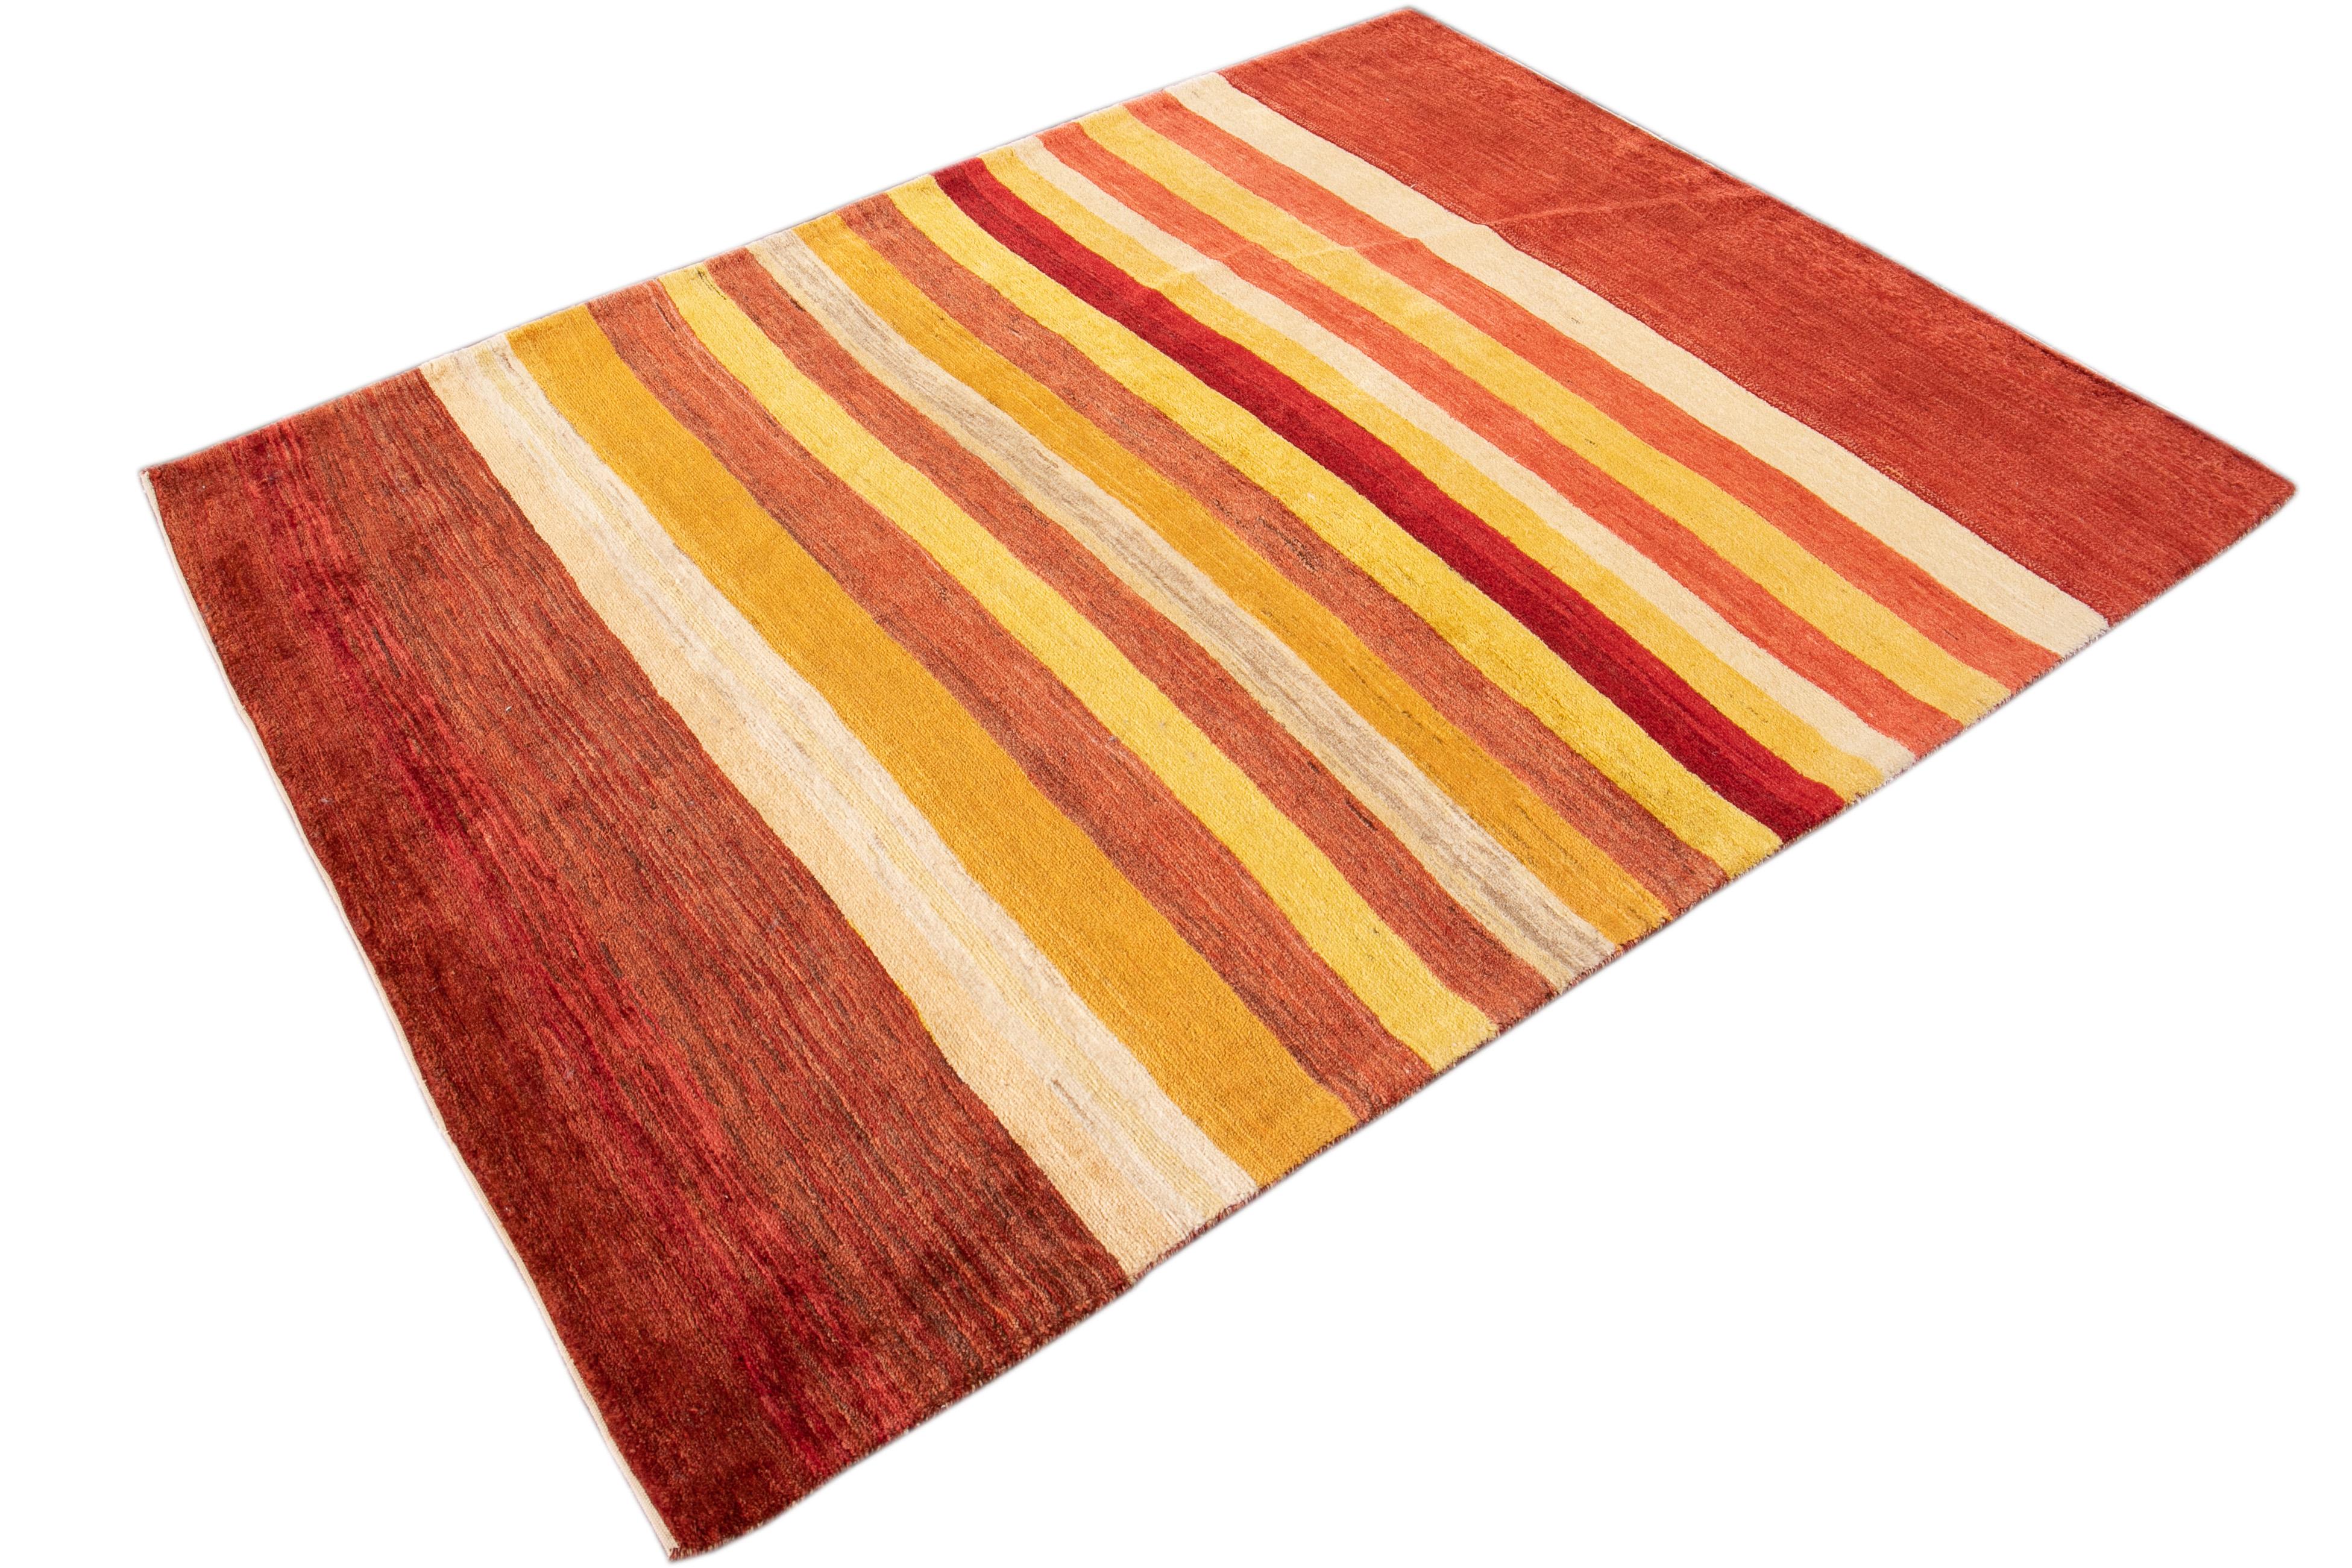 Beautiful contemporary 21st century Persian Gabbeh rug, with a rust/burnt orange field, ivory and yellow accents in a striped design.
This rug measures 5' 2